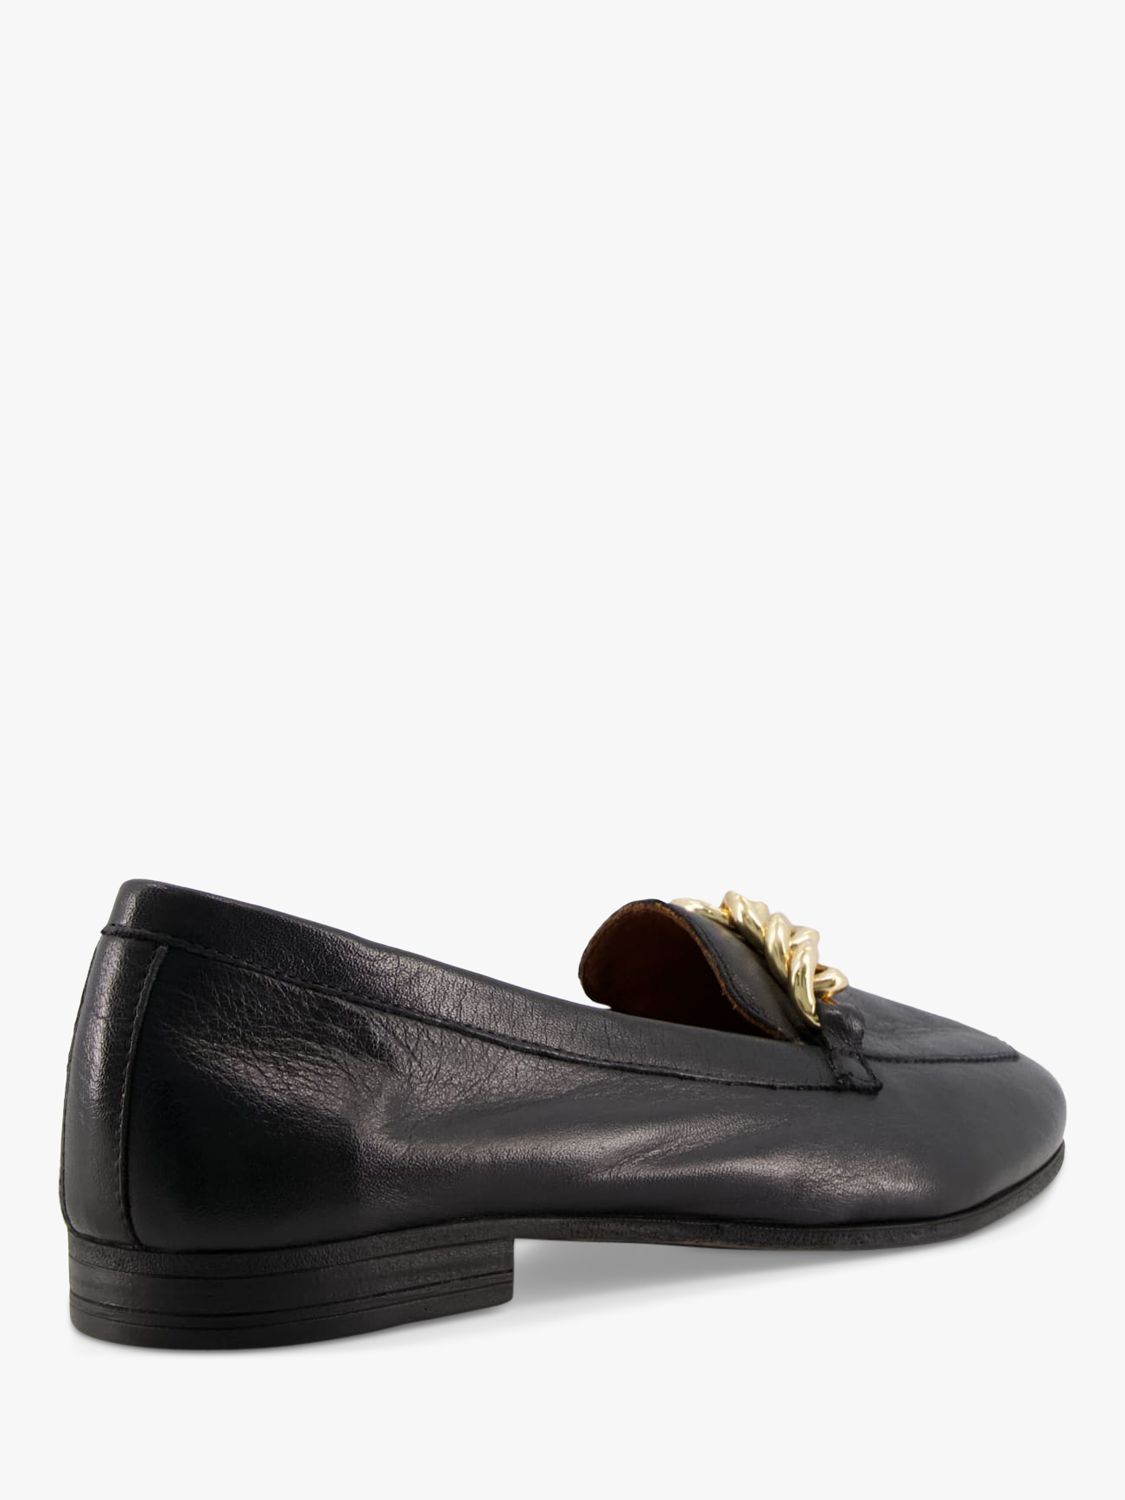 Buy Dune Goldsmith Leather Chain Detail Loafers Online at johnlewis.com